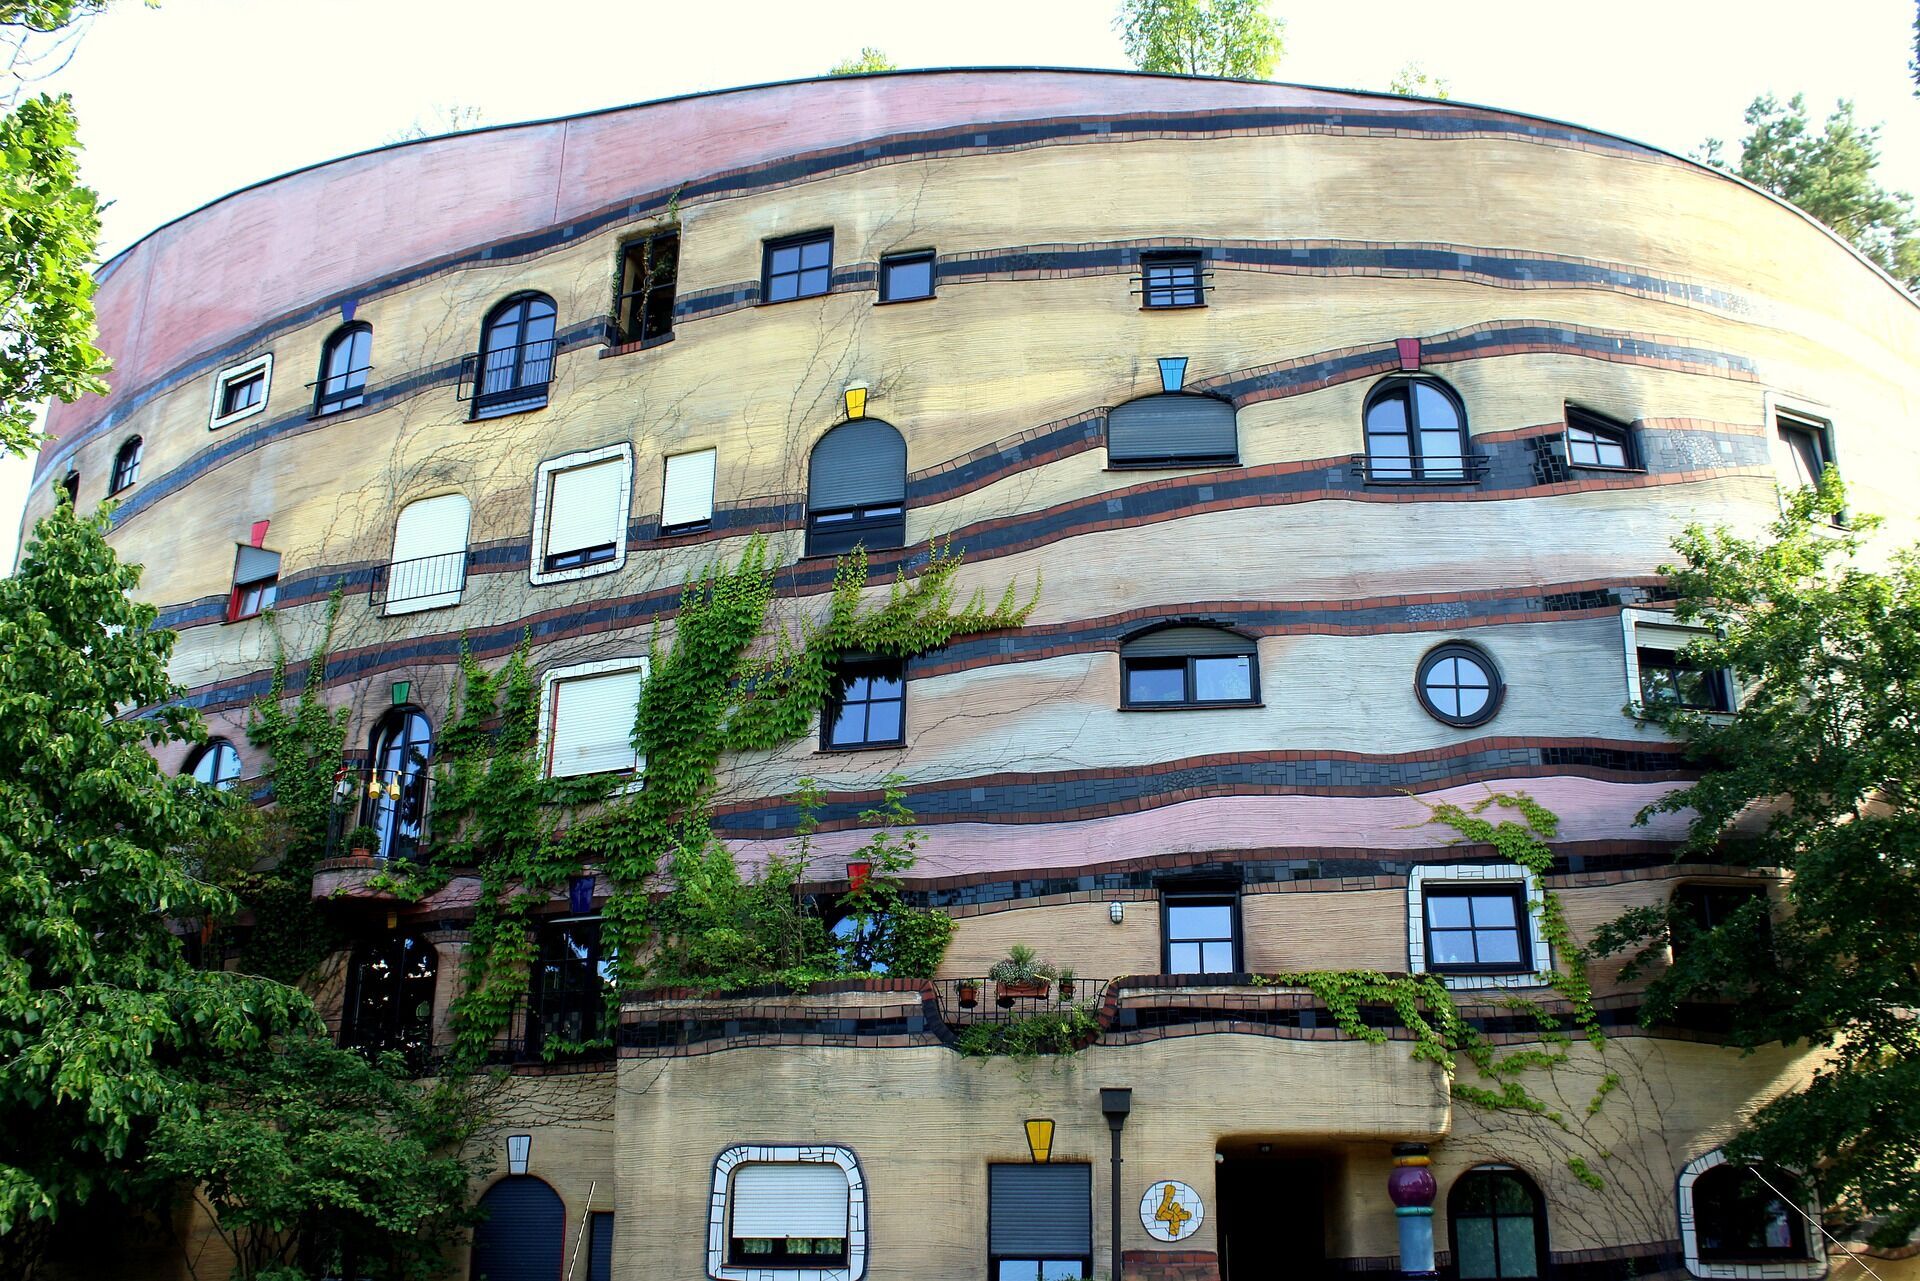 5 of the most unusual residential complexes in the world, near which everyone takes pictures